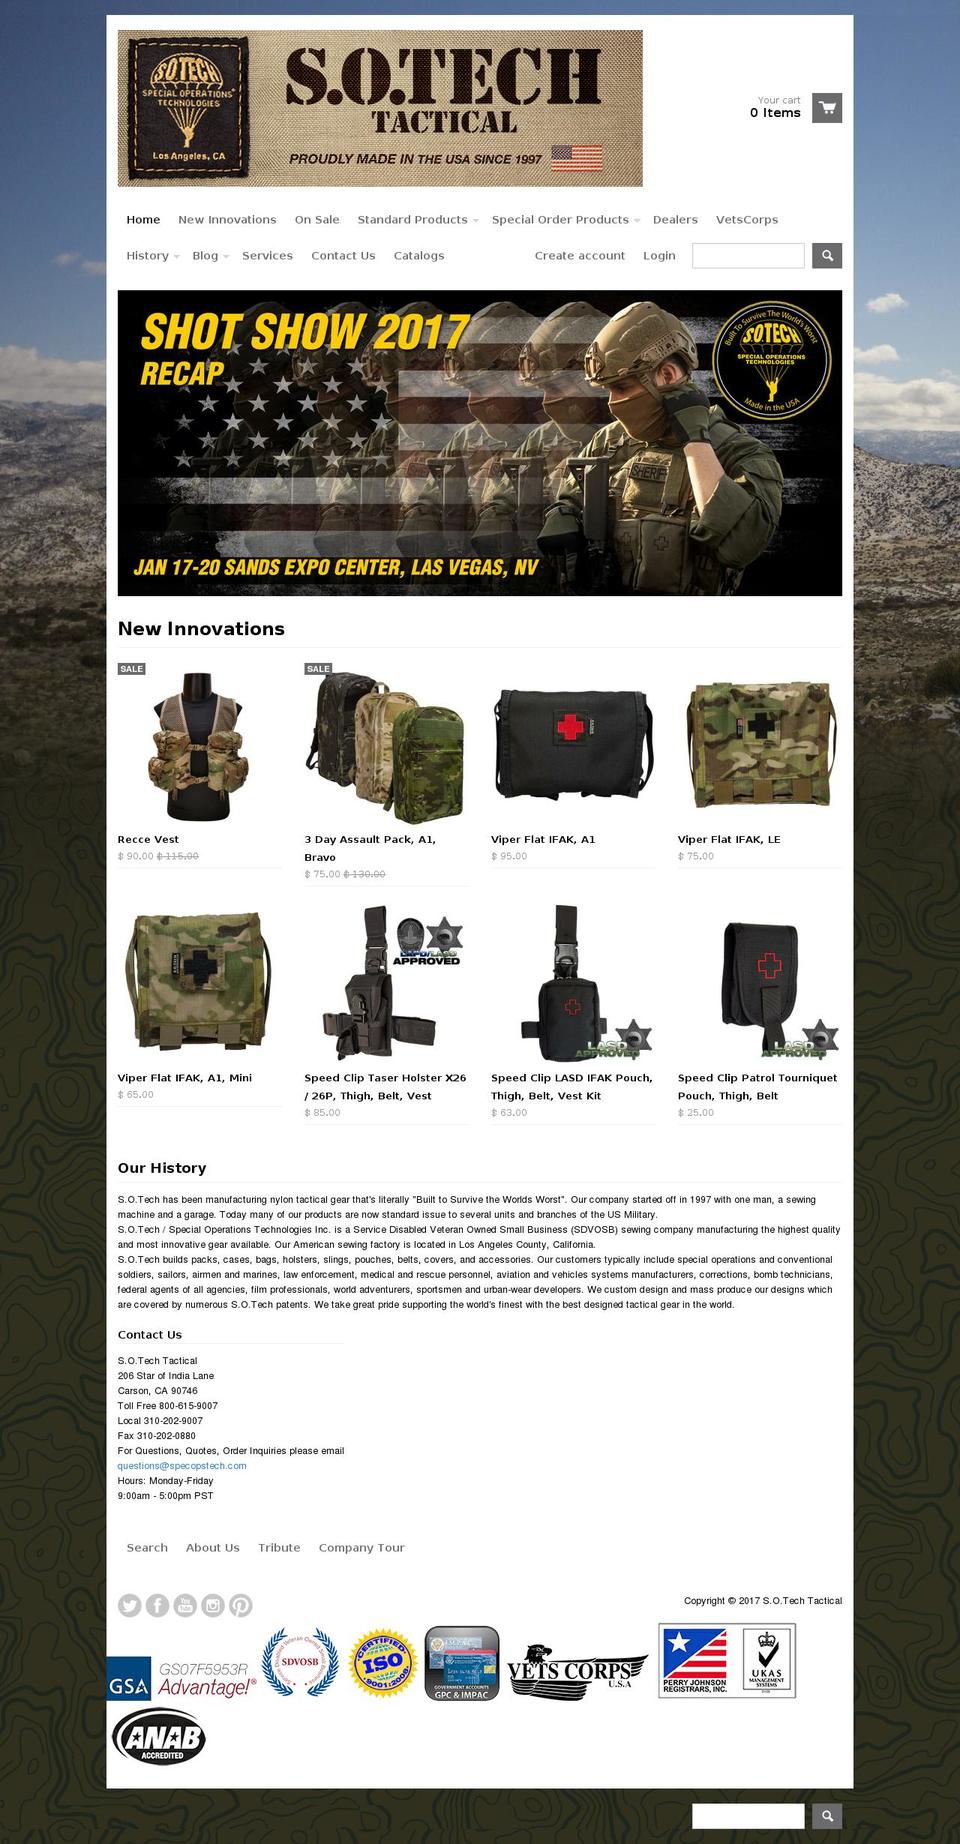 Motion Shopify theme site example sotechtactical.com